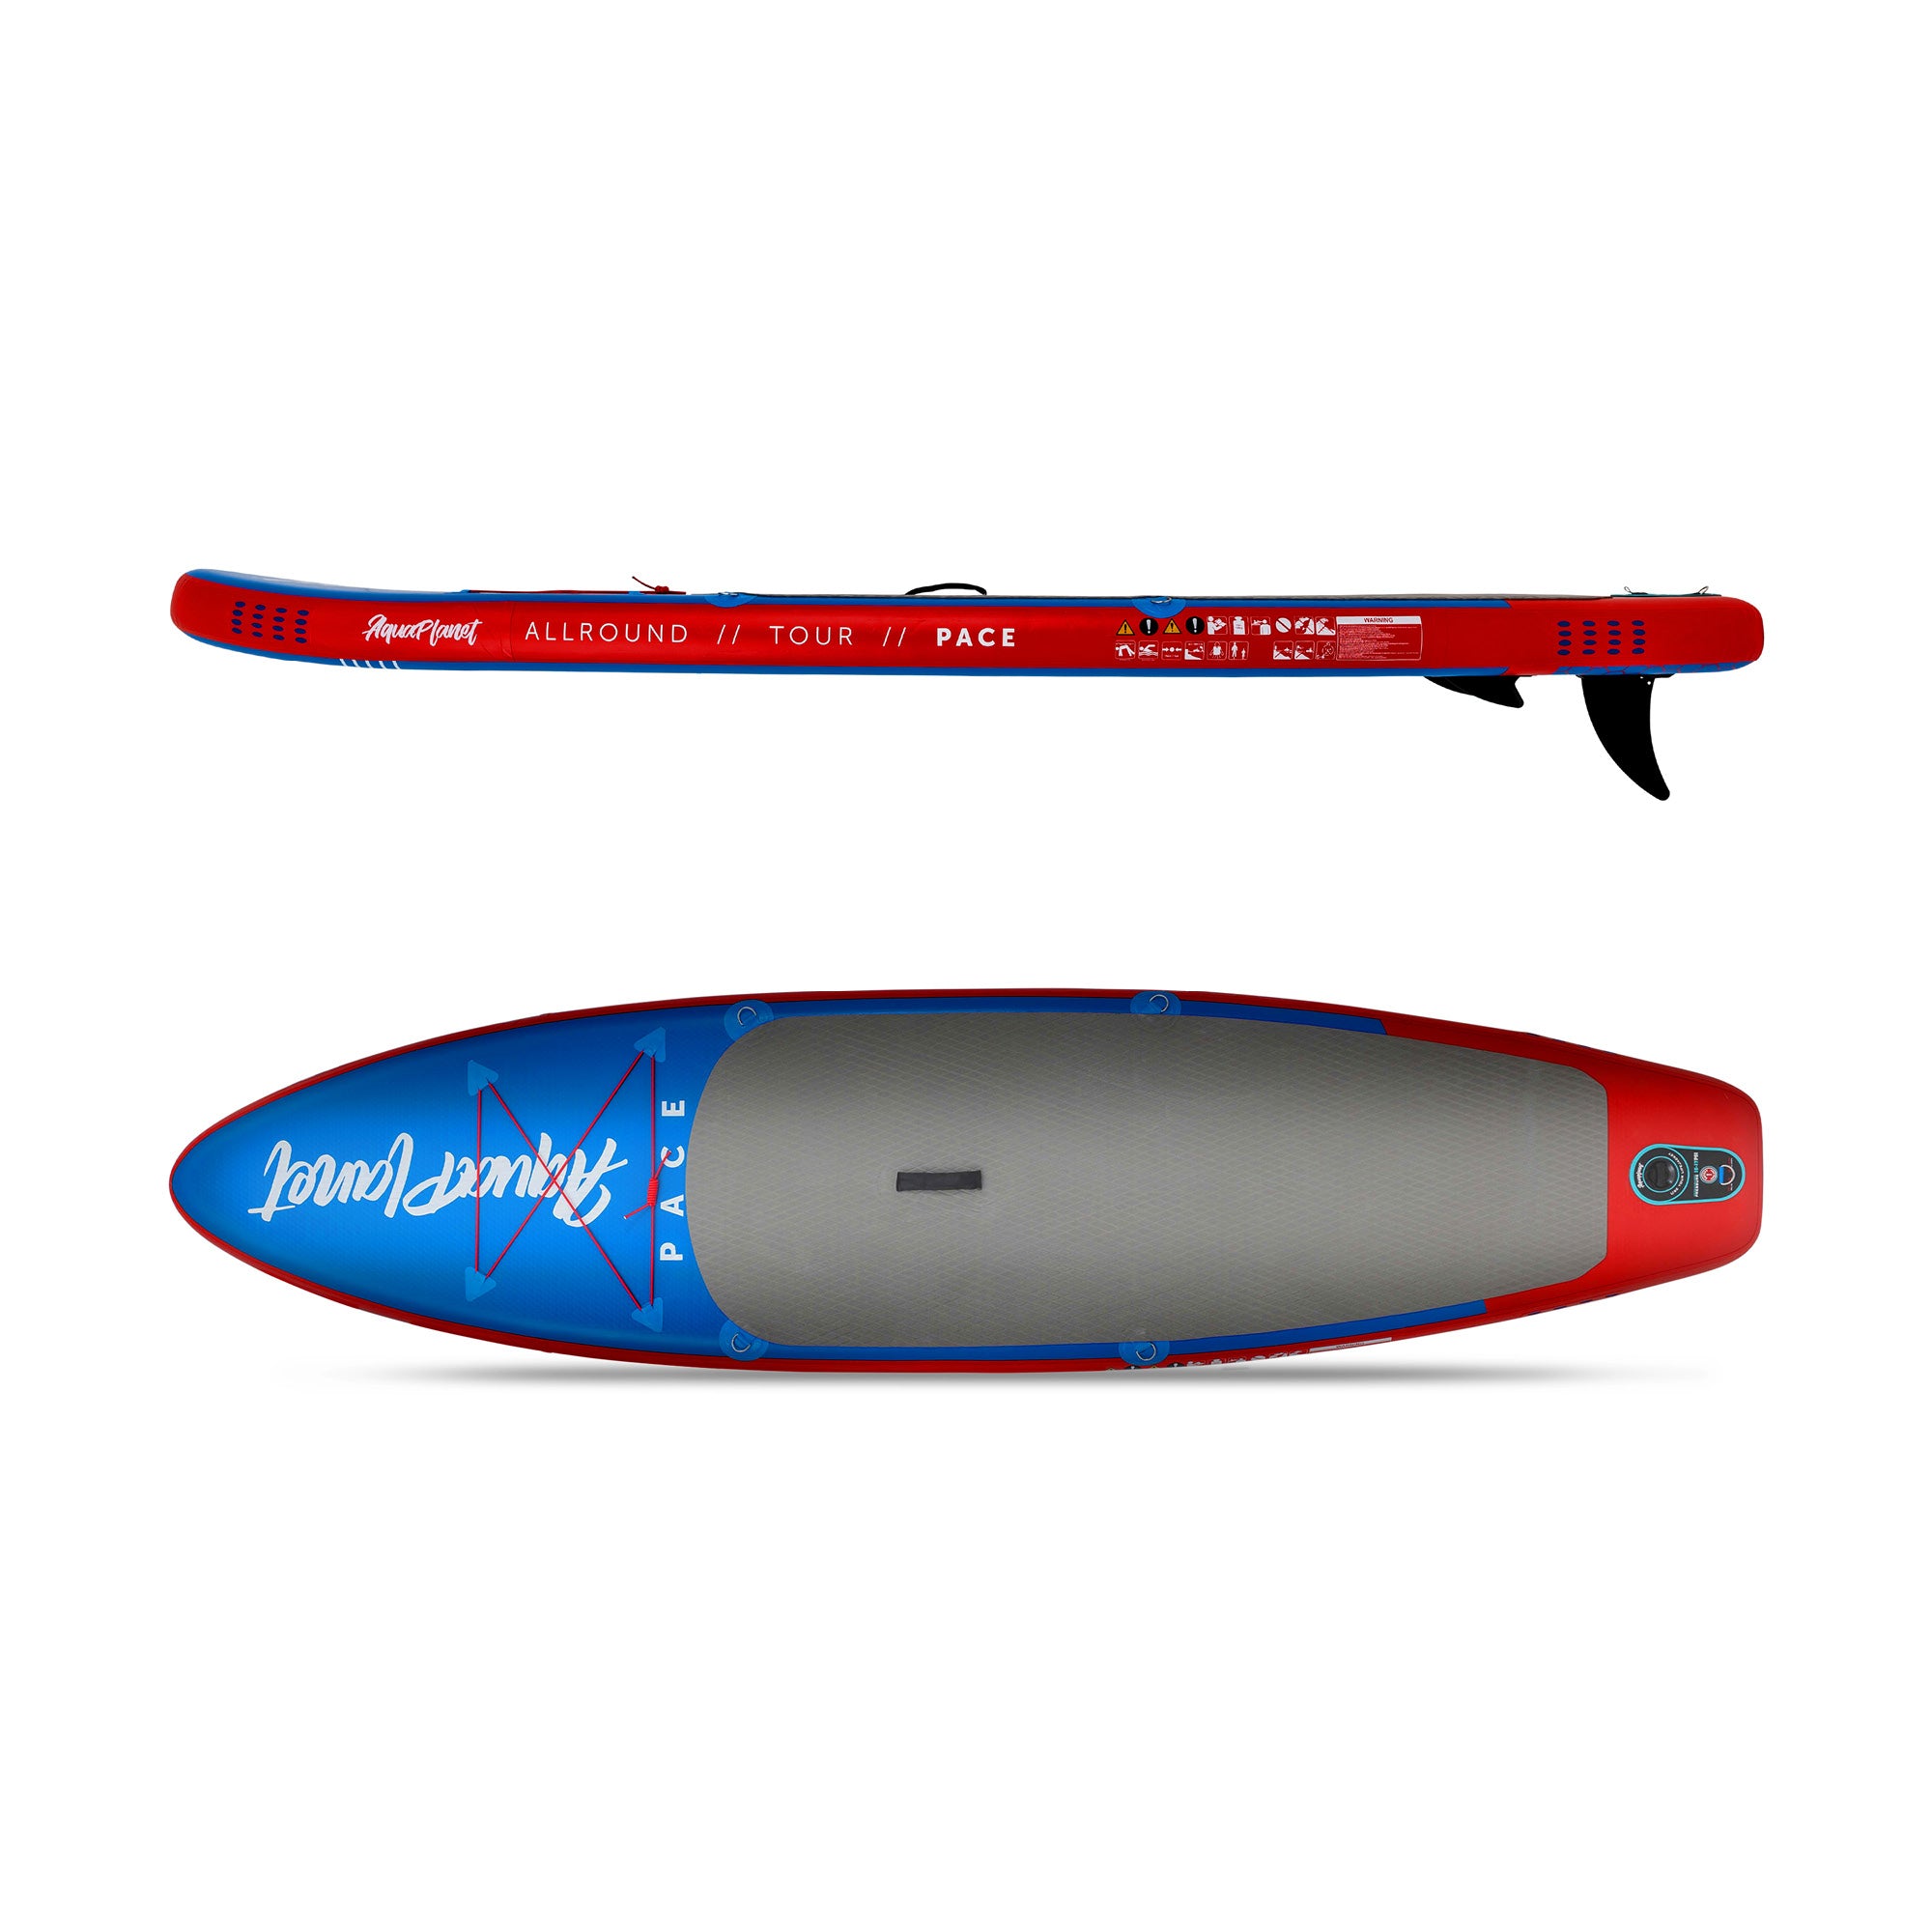 Top View and Side View of the Aquaplanet Pace 10'6" iSUP Inflatable Stand Up Paddleboard Set